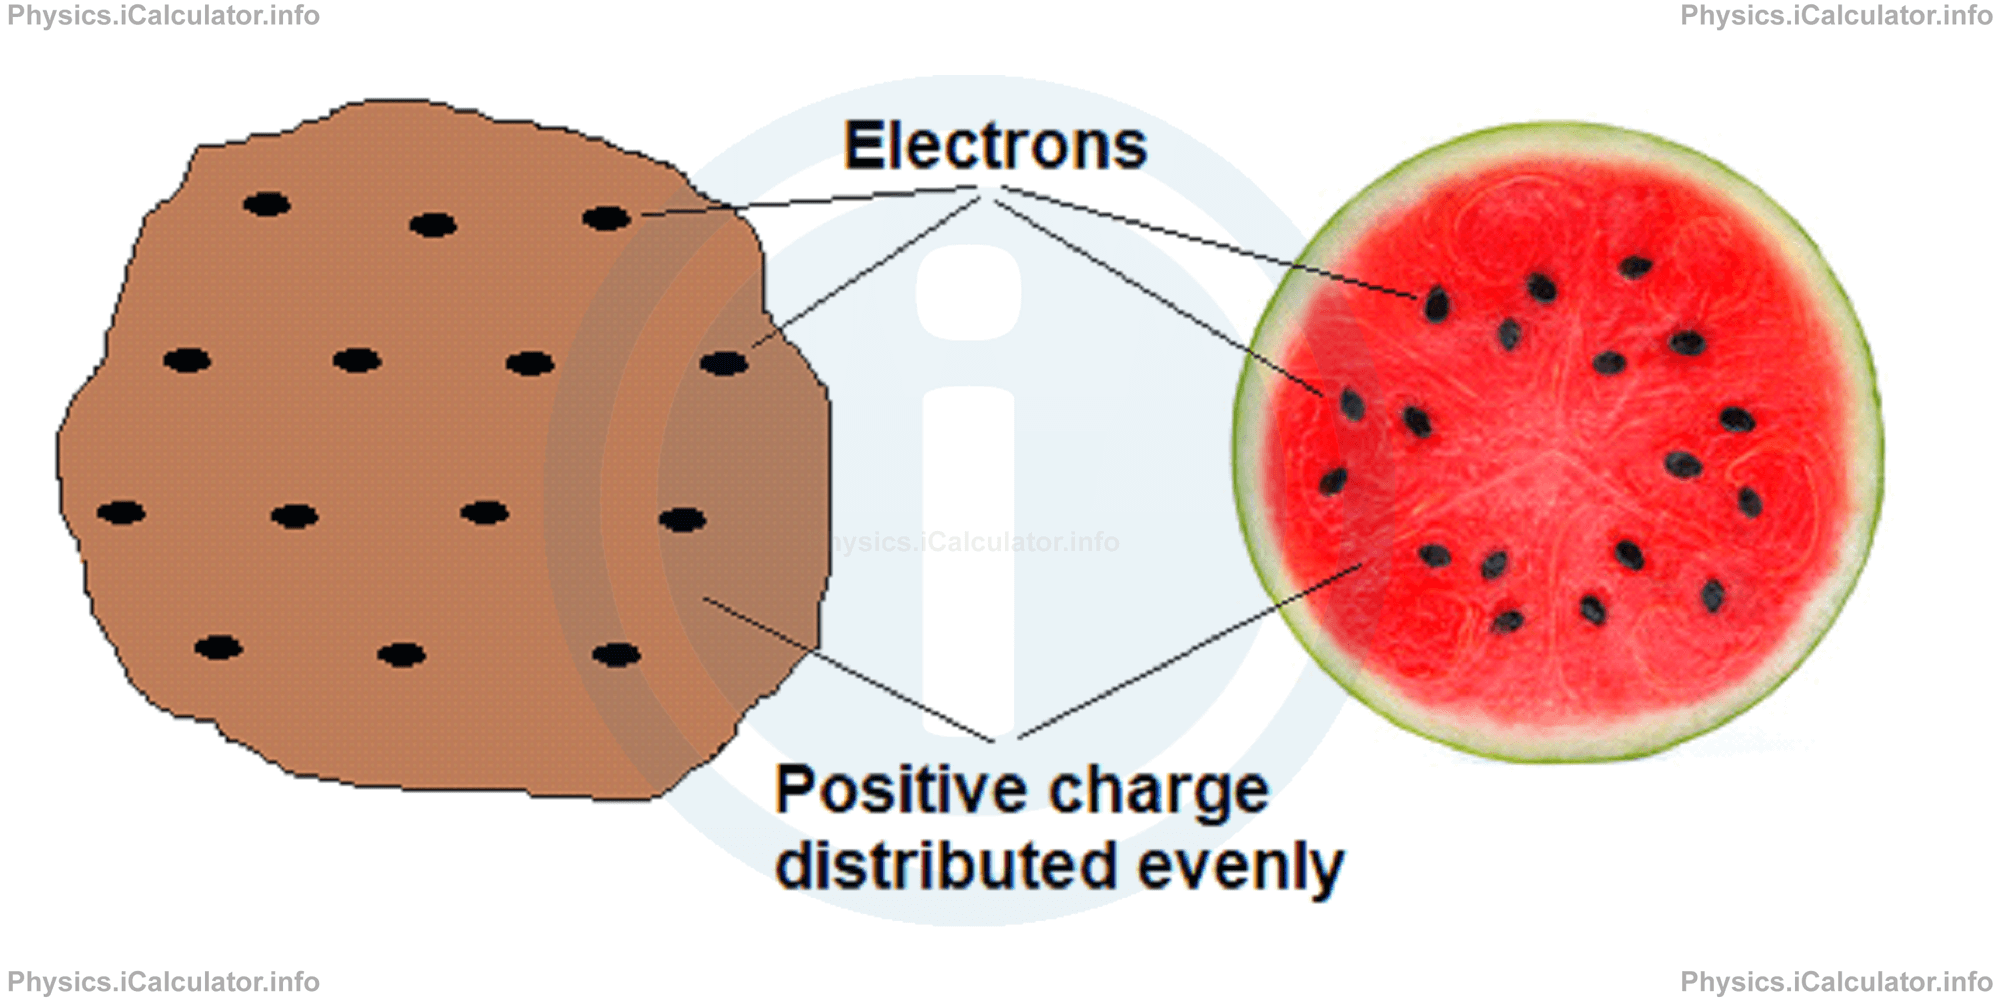 Physics Tutorials: This image provides visual information for the physics tutorial Atomic Nucleus and Its Structural Properties 